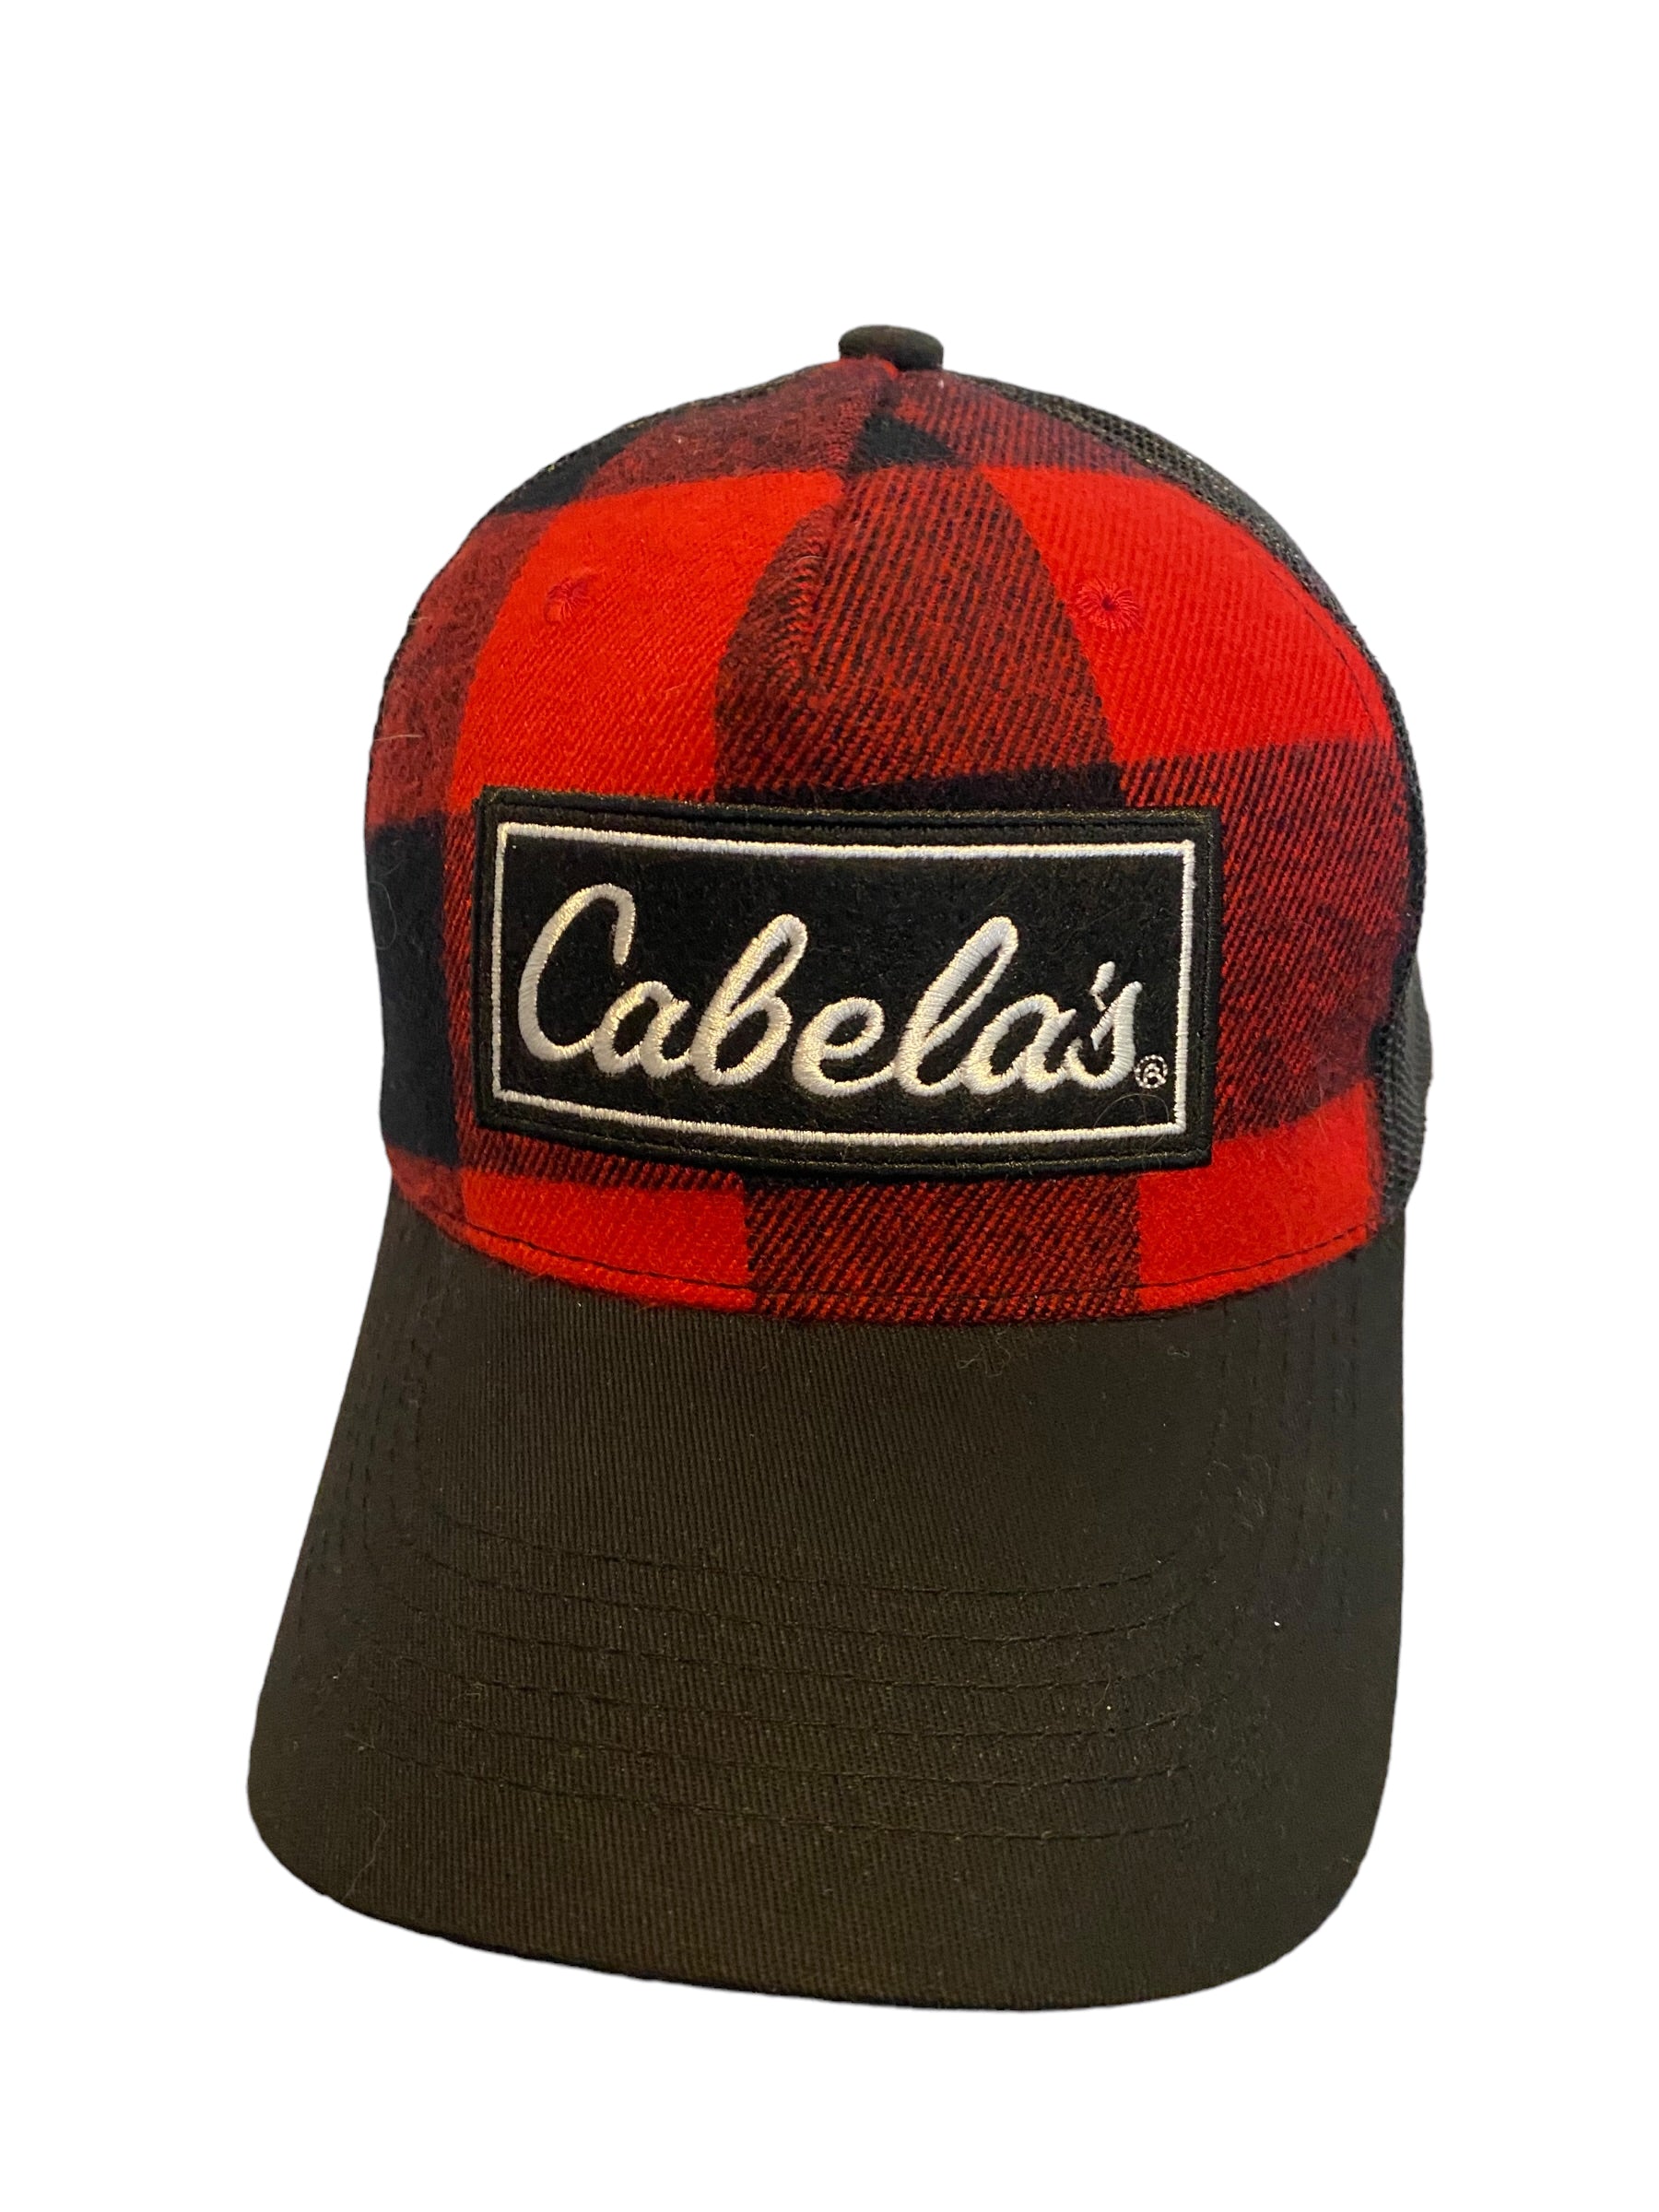 Cabelas Trucker Hat Cap Buffalo Plaid Black And Red Checker Pattern Me